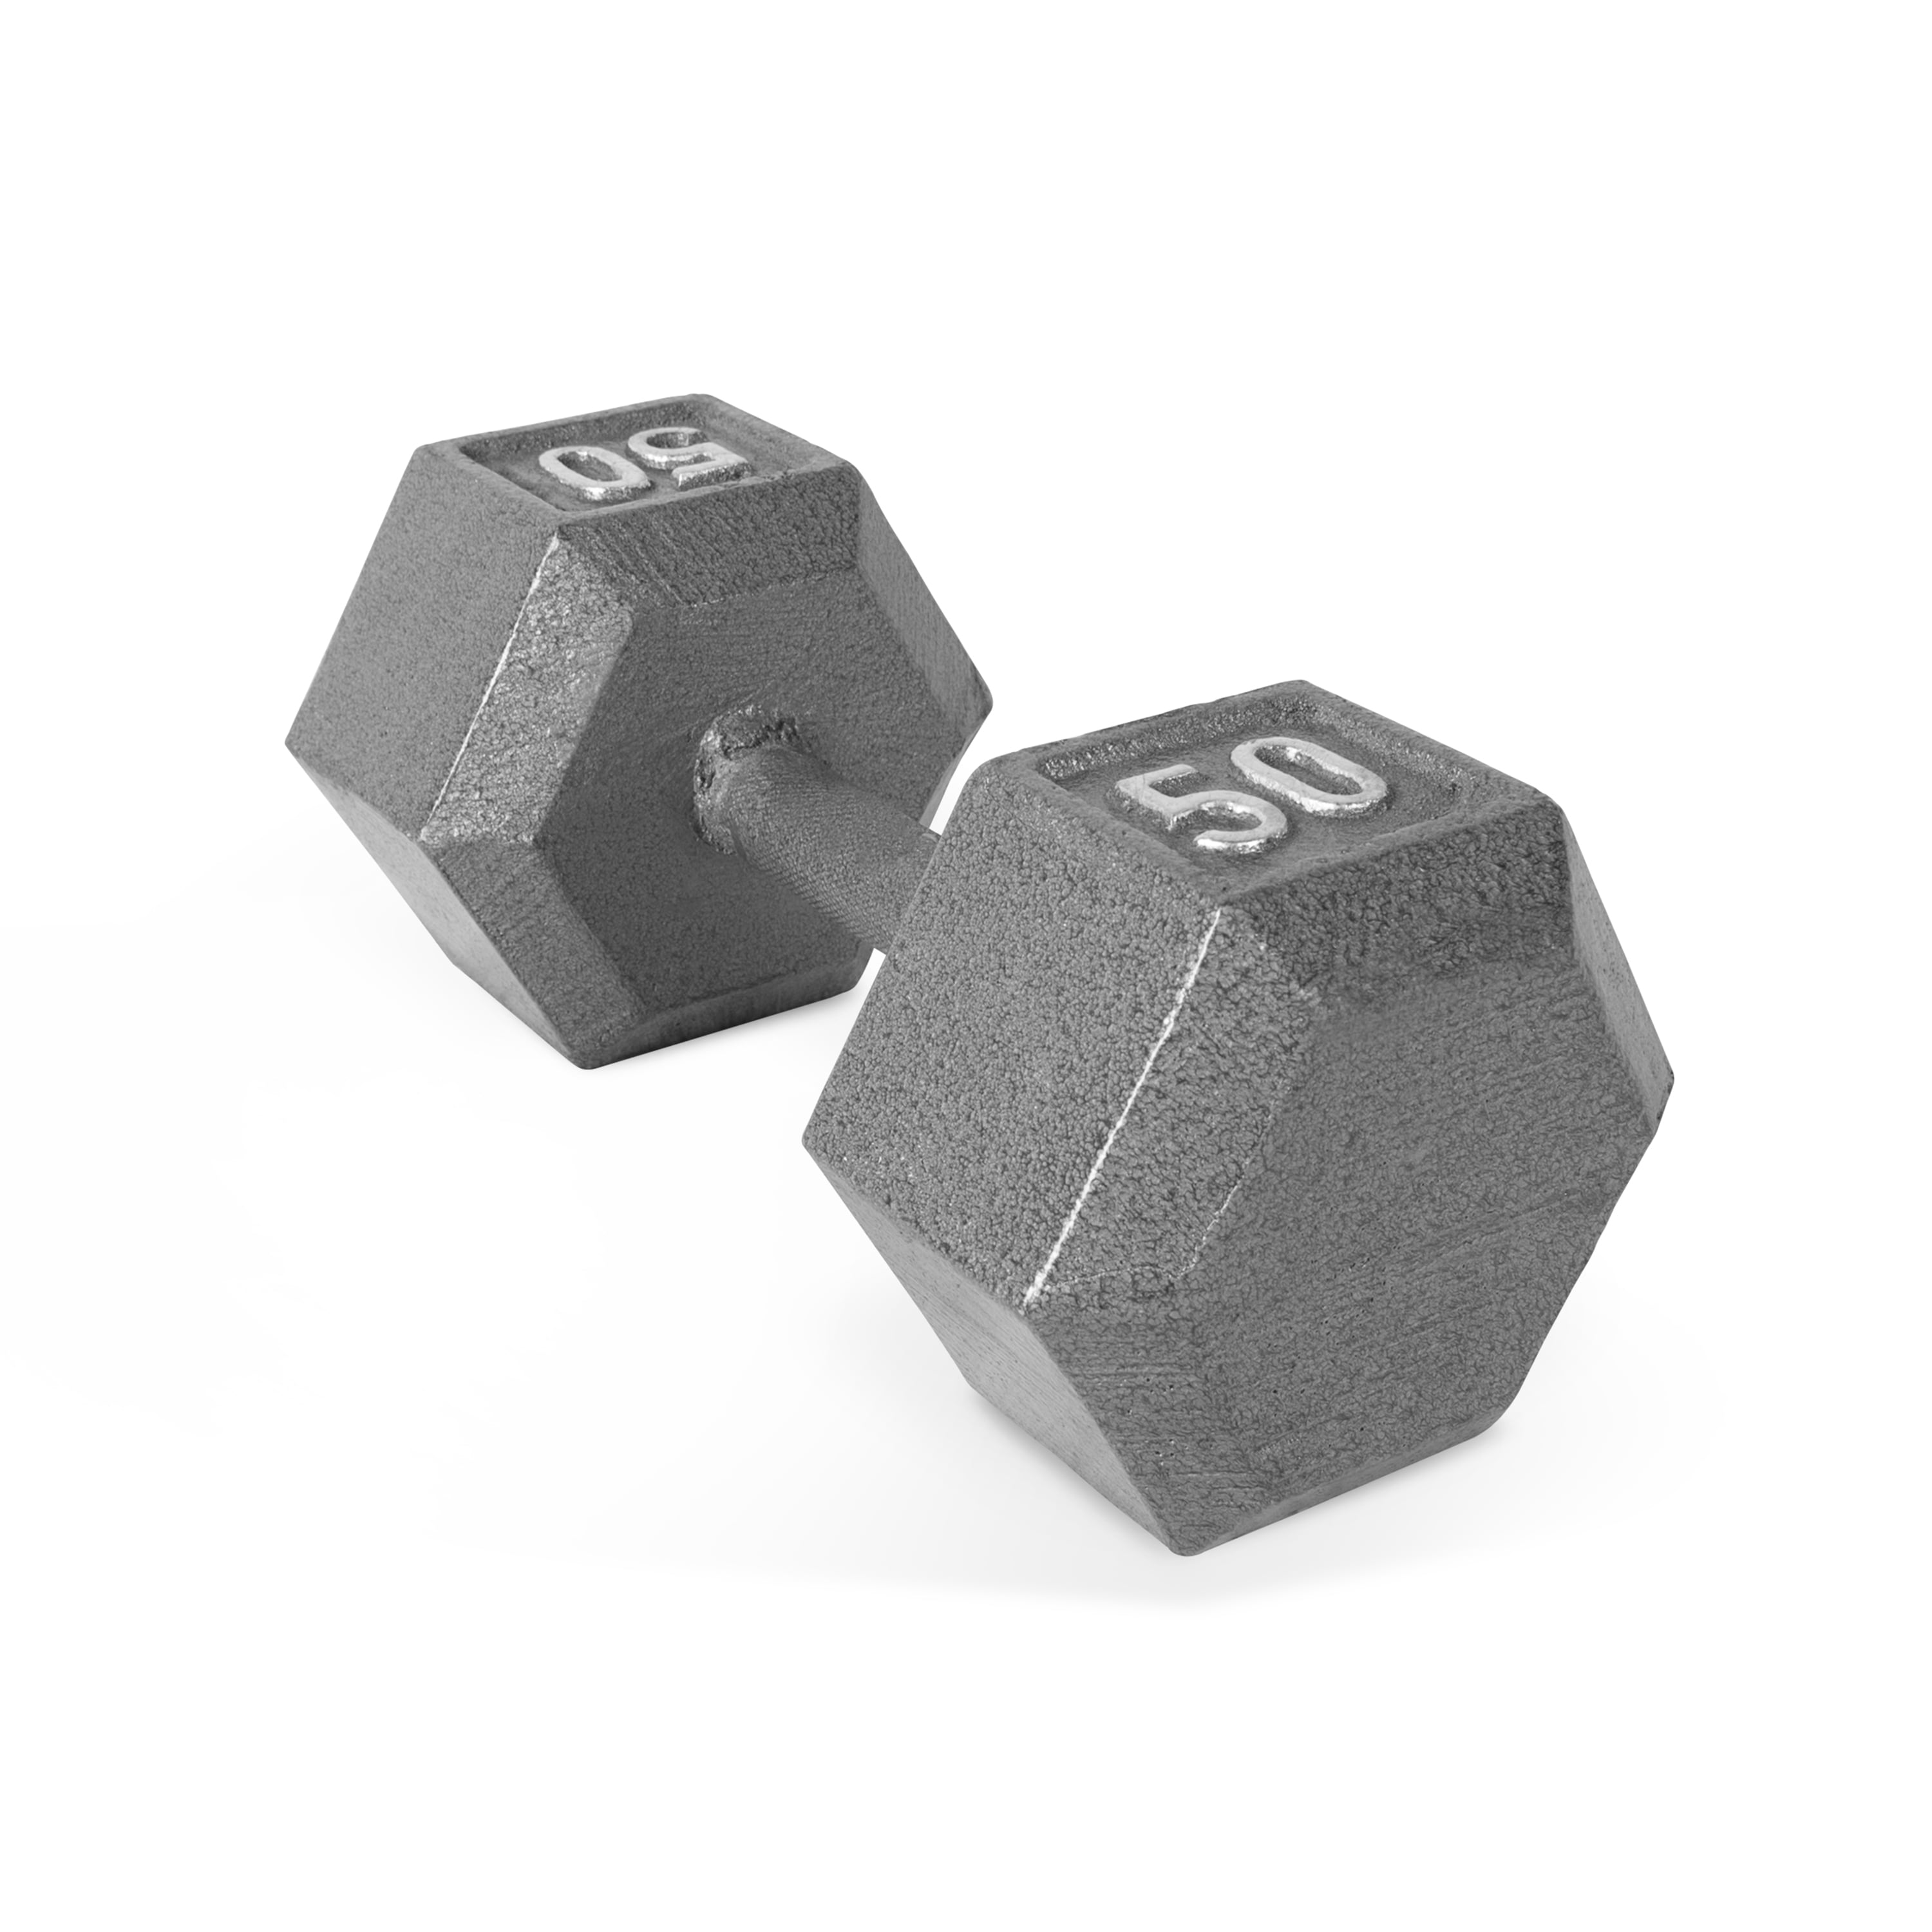 Multi-Select Weights Size Options Available Strength Training Free Weights Set of 2 for Women and Men Weights Sold by Pairs for Full Body Workout CAP Barbell Cast Iron Solid Hexagon Gray Dumbbells